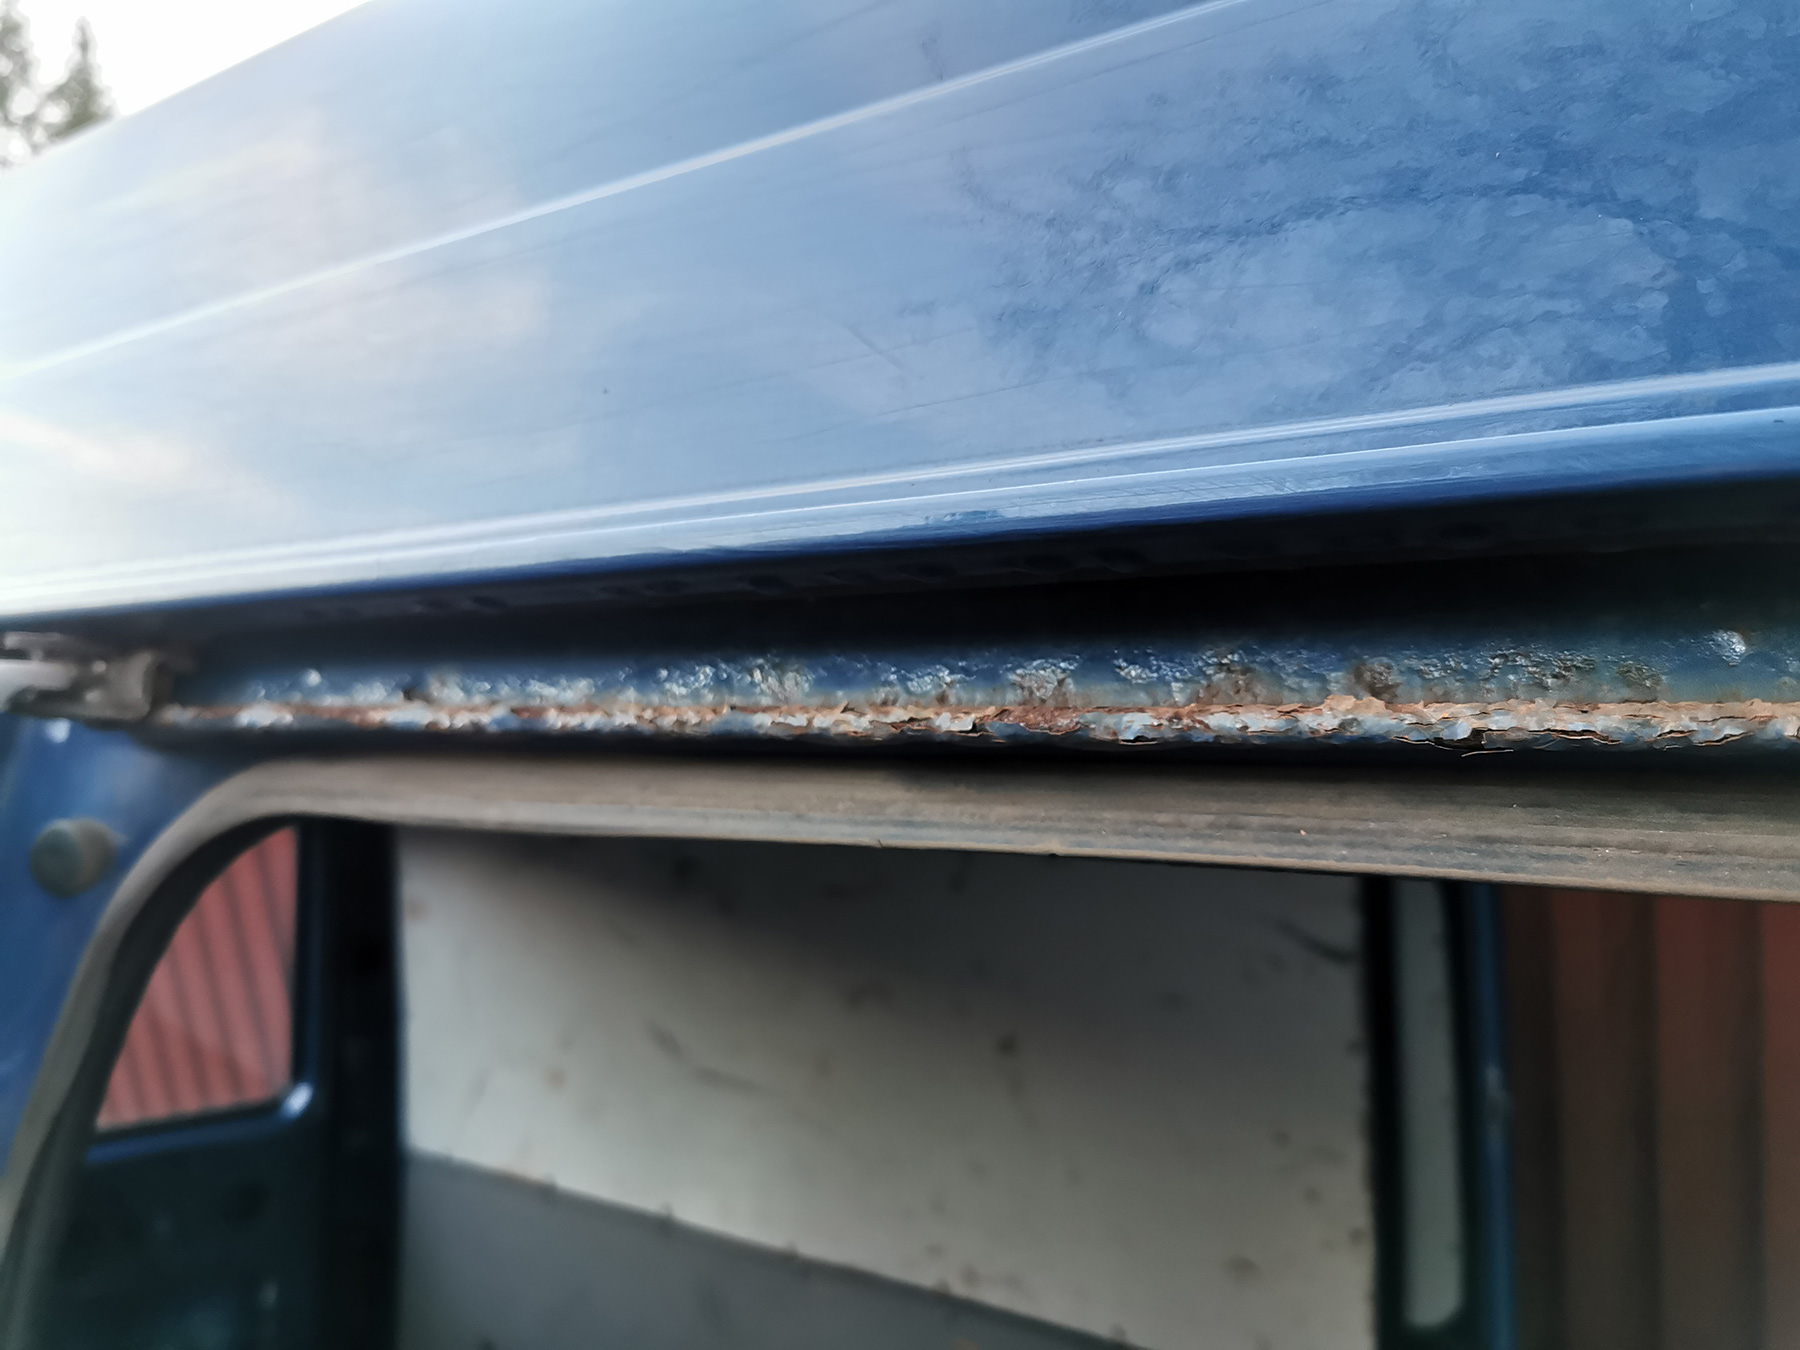 The glide-rail for both doors are rusty, but I think this is primarily surface rust too